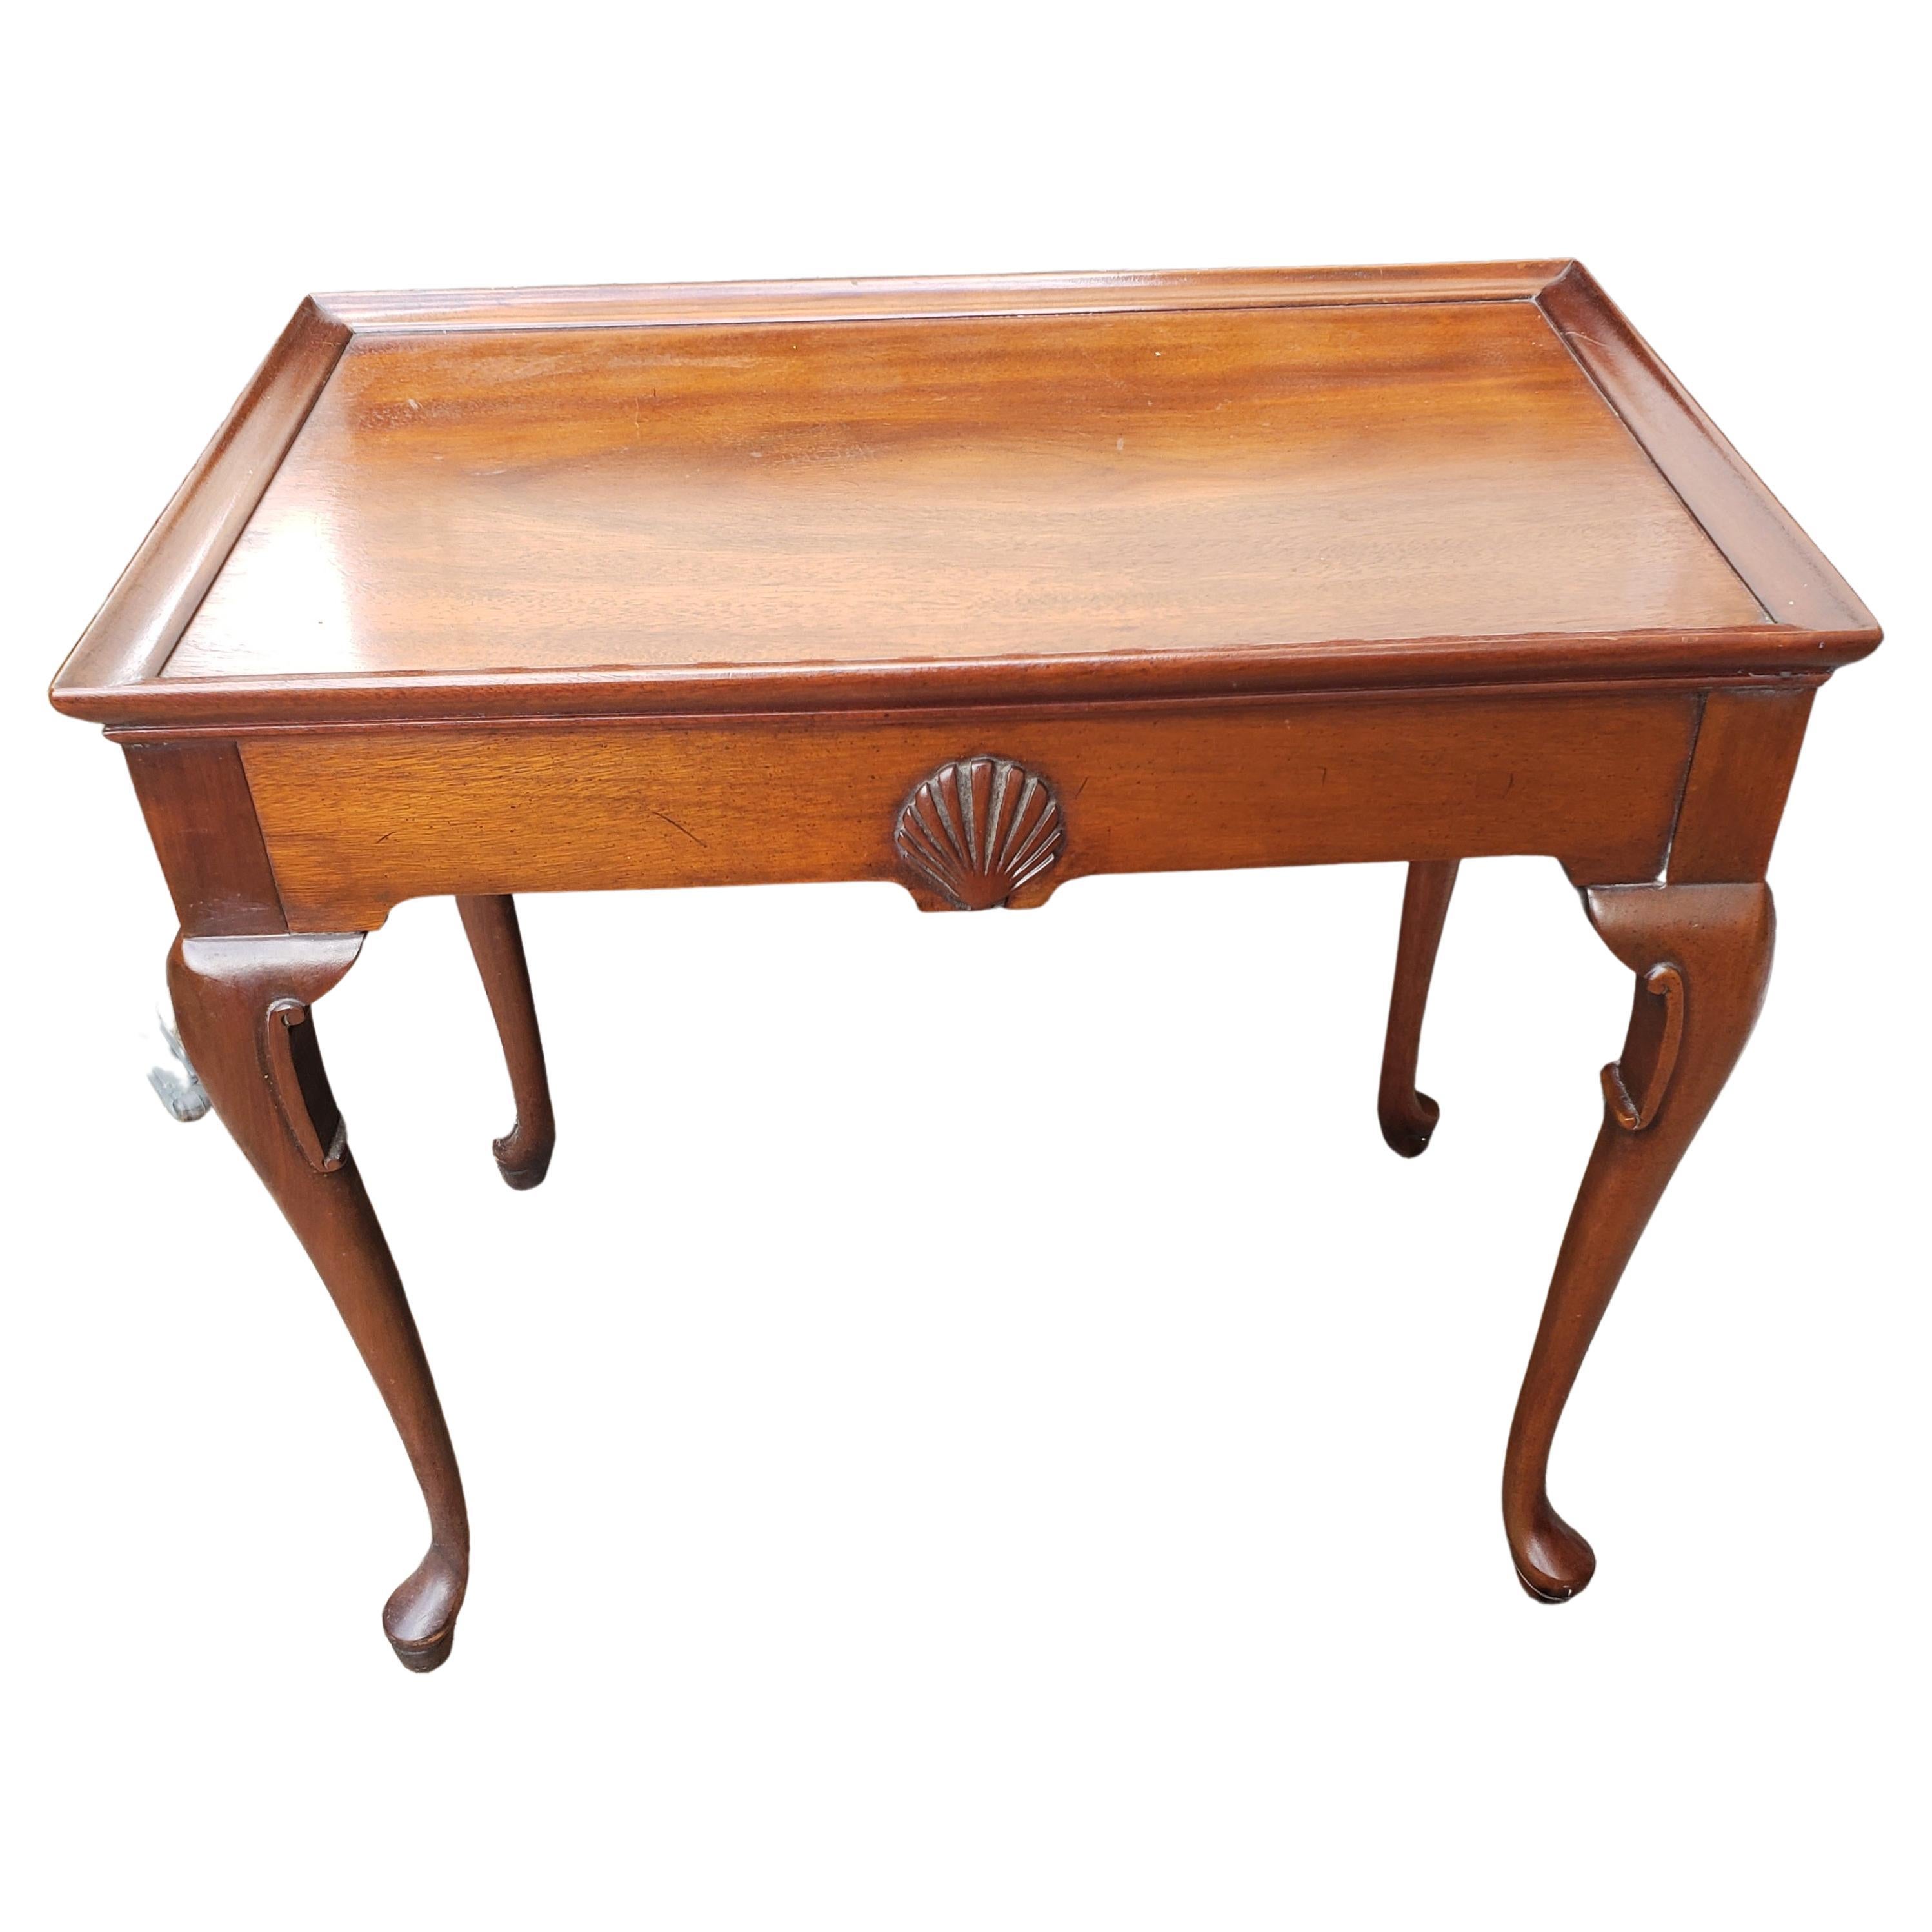 1950s English Mahogany Queen Anne Tray Top Tea Table by Hickory Chair Co. For Sale